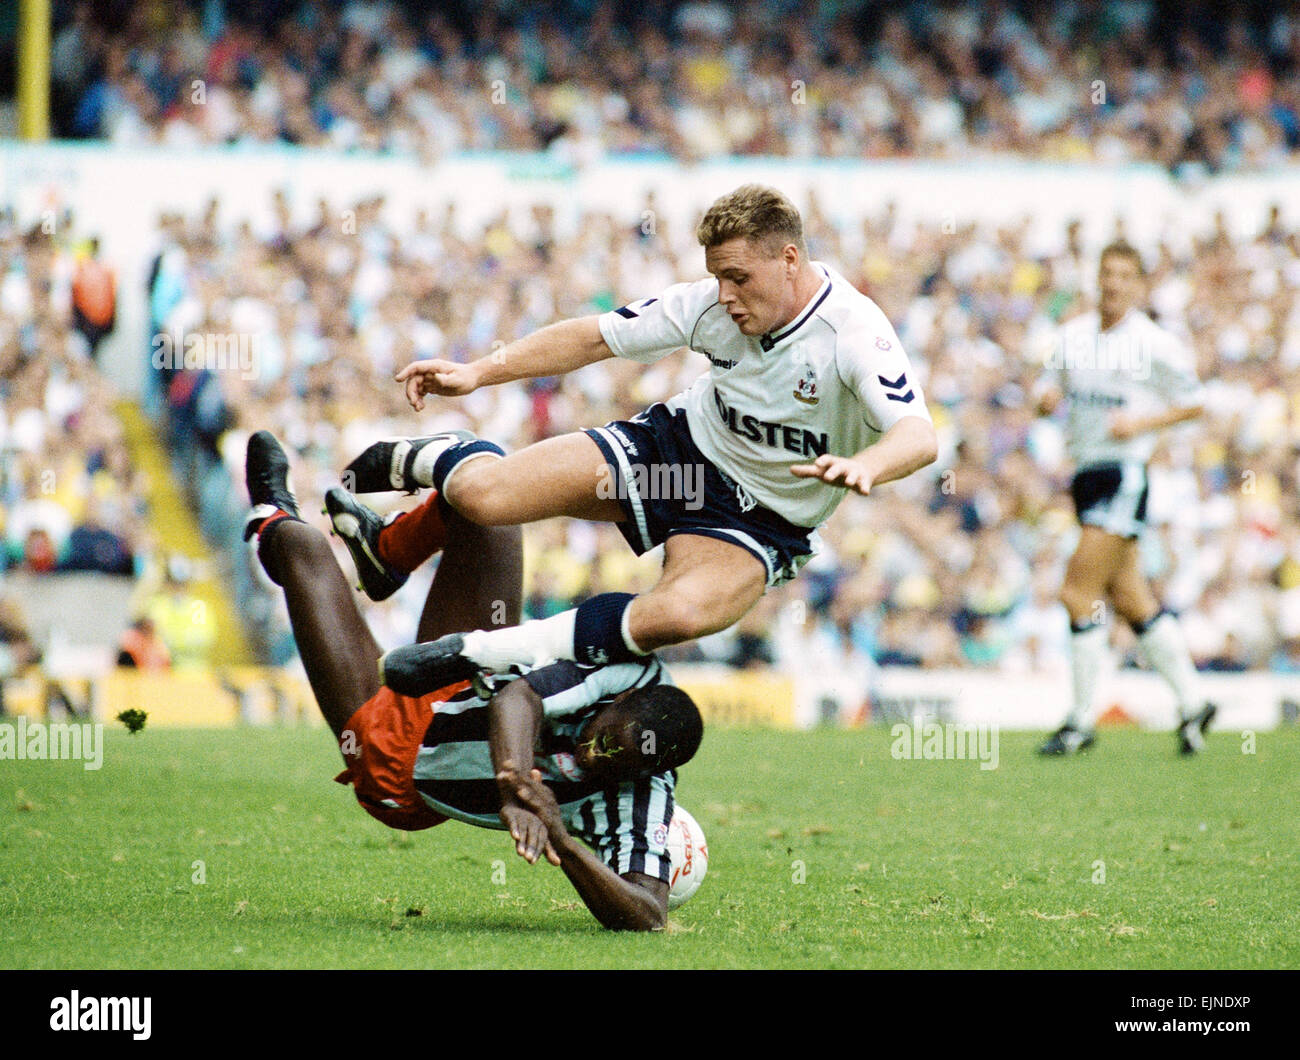 English League Division One match at White Hart Lane. Tottenham Hotspur 3 v Derby County 0. Paul Gascoigne of Spurs, who scored a hat-trick in the match, in a hard challenge for the ball. 8th September 1990. Stock Photo